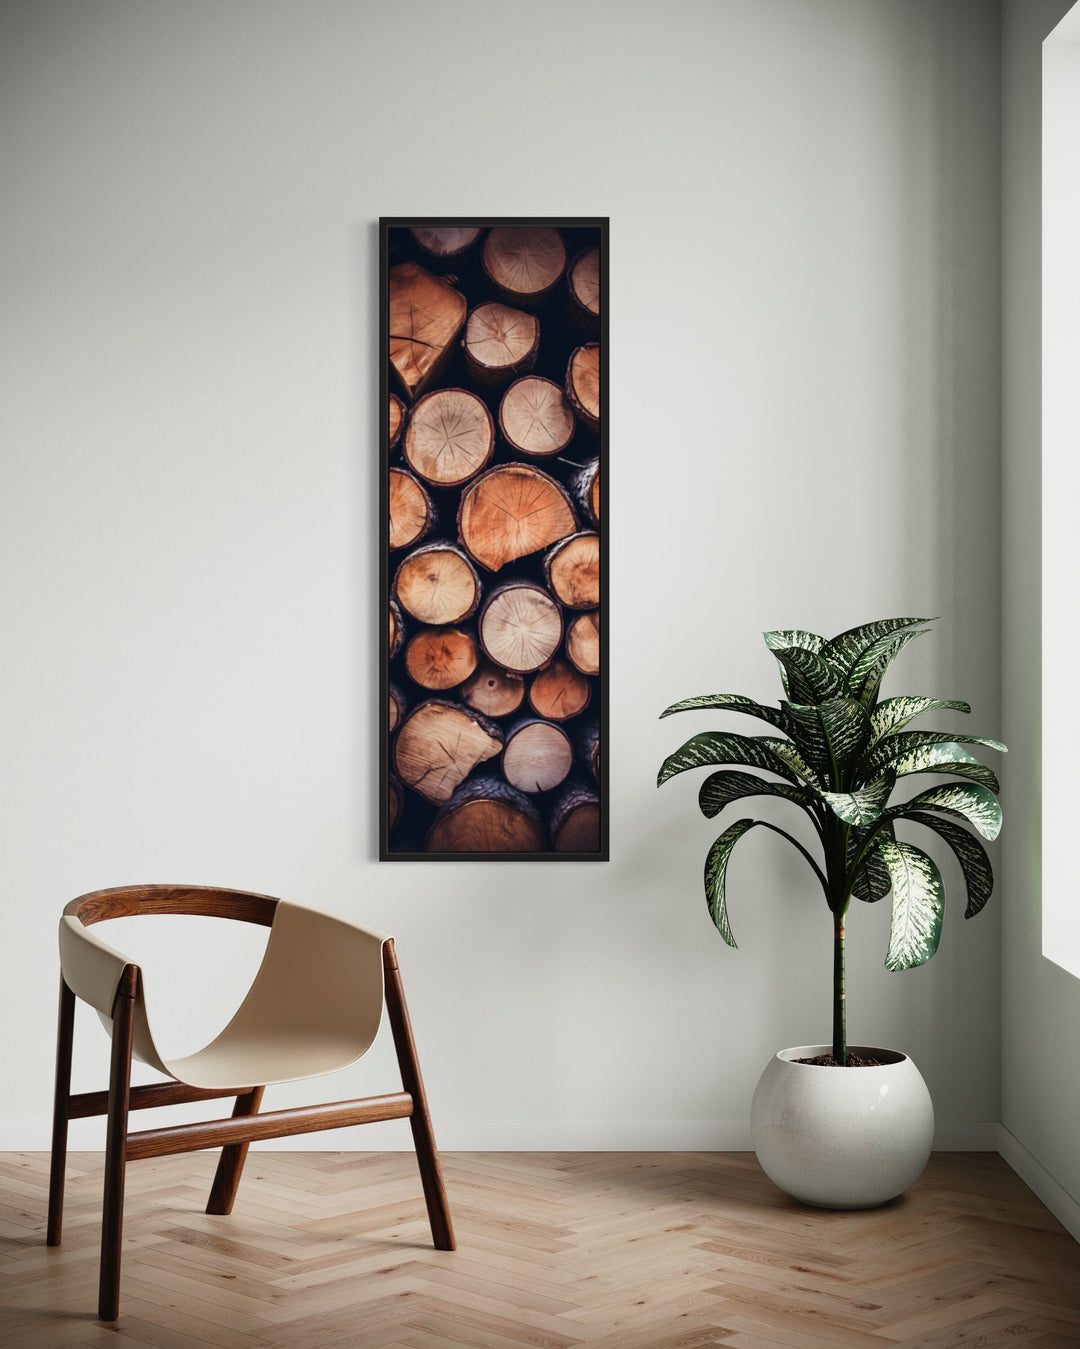 Tall Narrow Vertical Stack of Wood Rustic Wall Art in narrow space